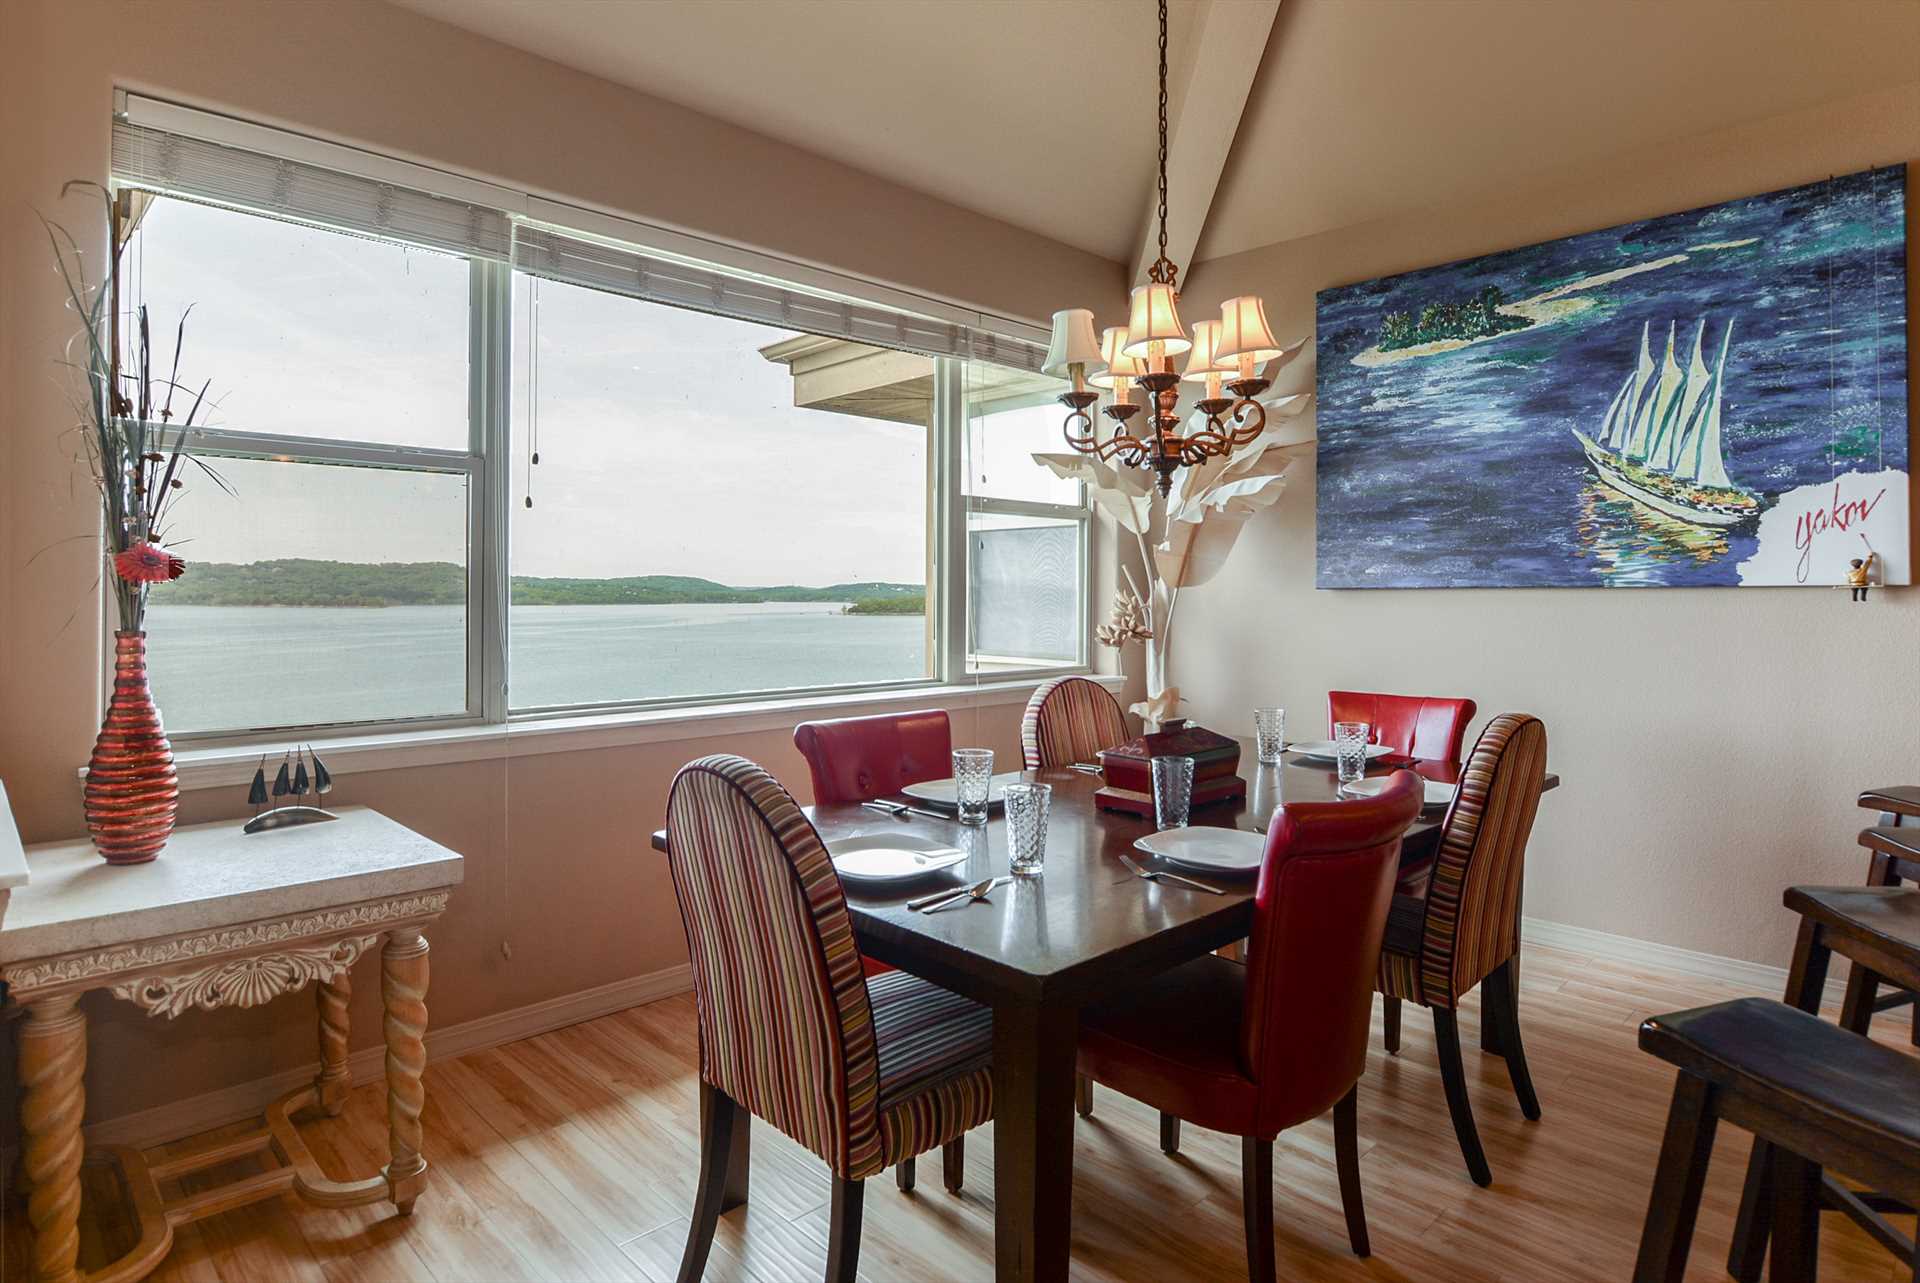 The dining area provides incredible views of Table Rock Lake